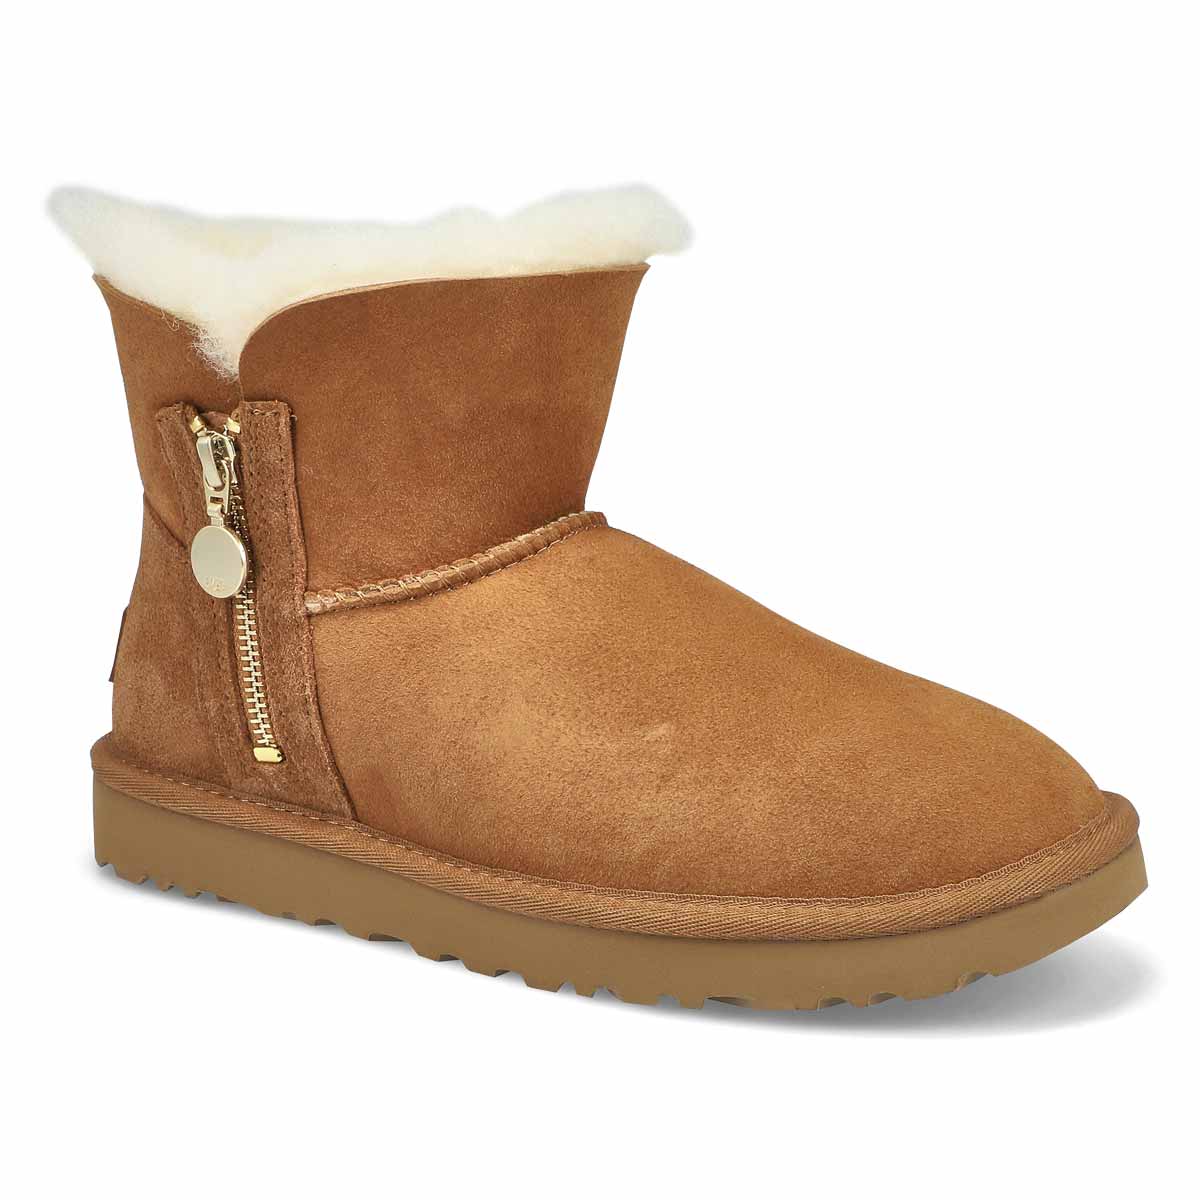 size 5 ugg boots sale